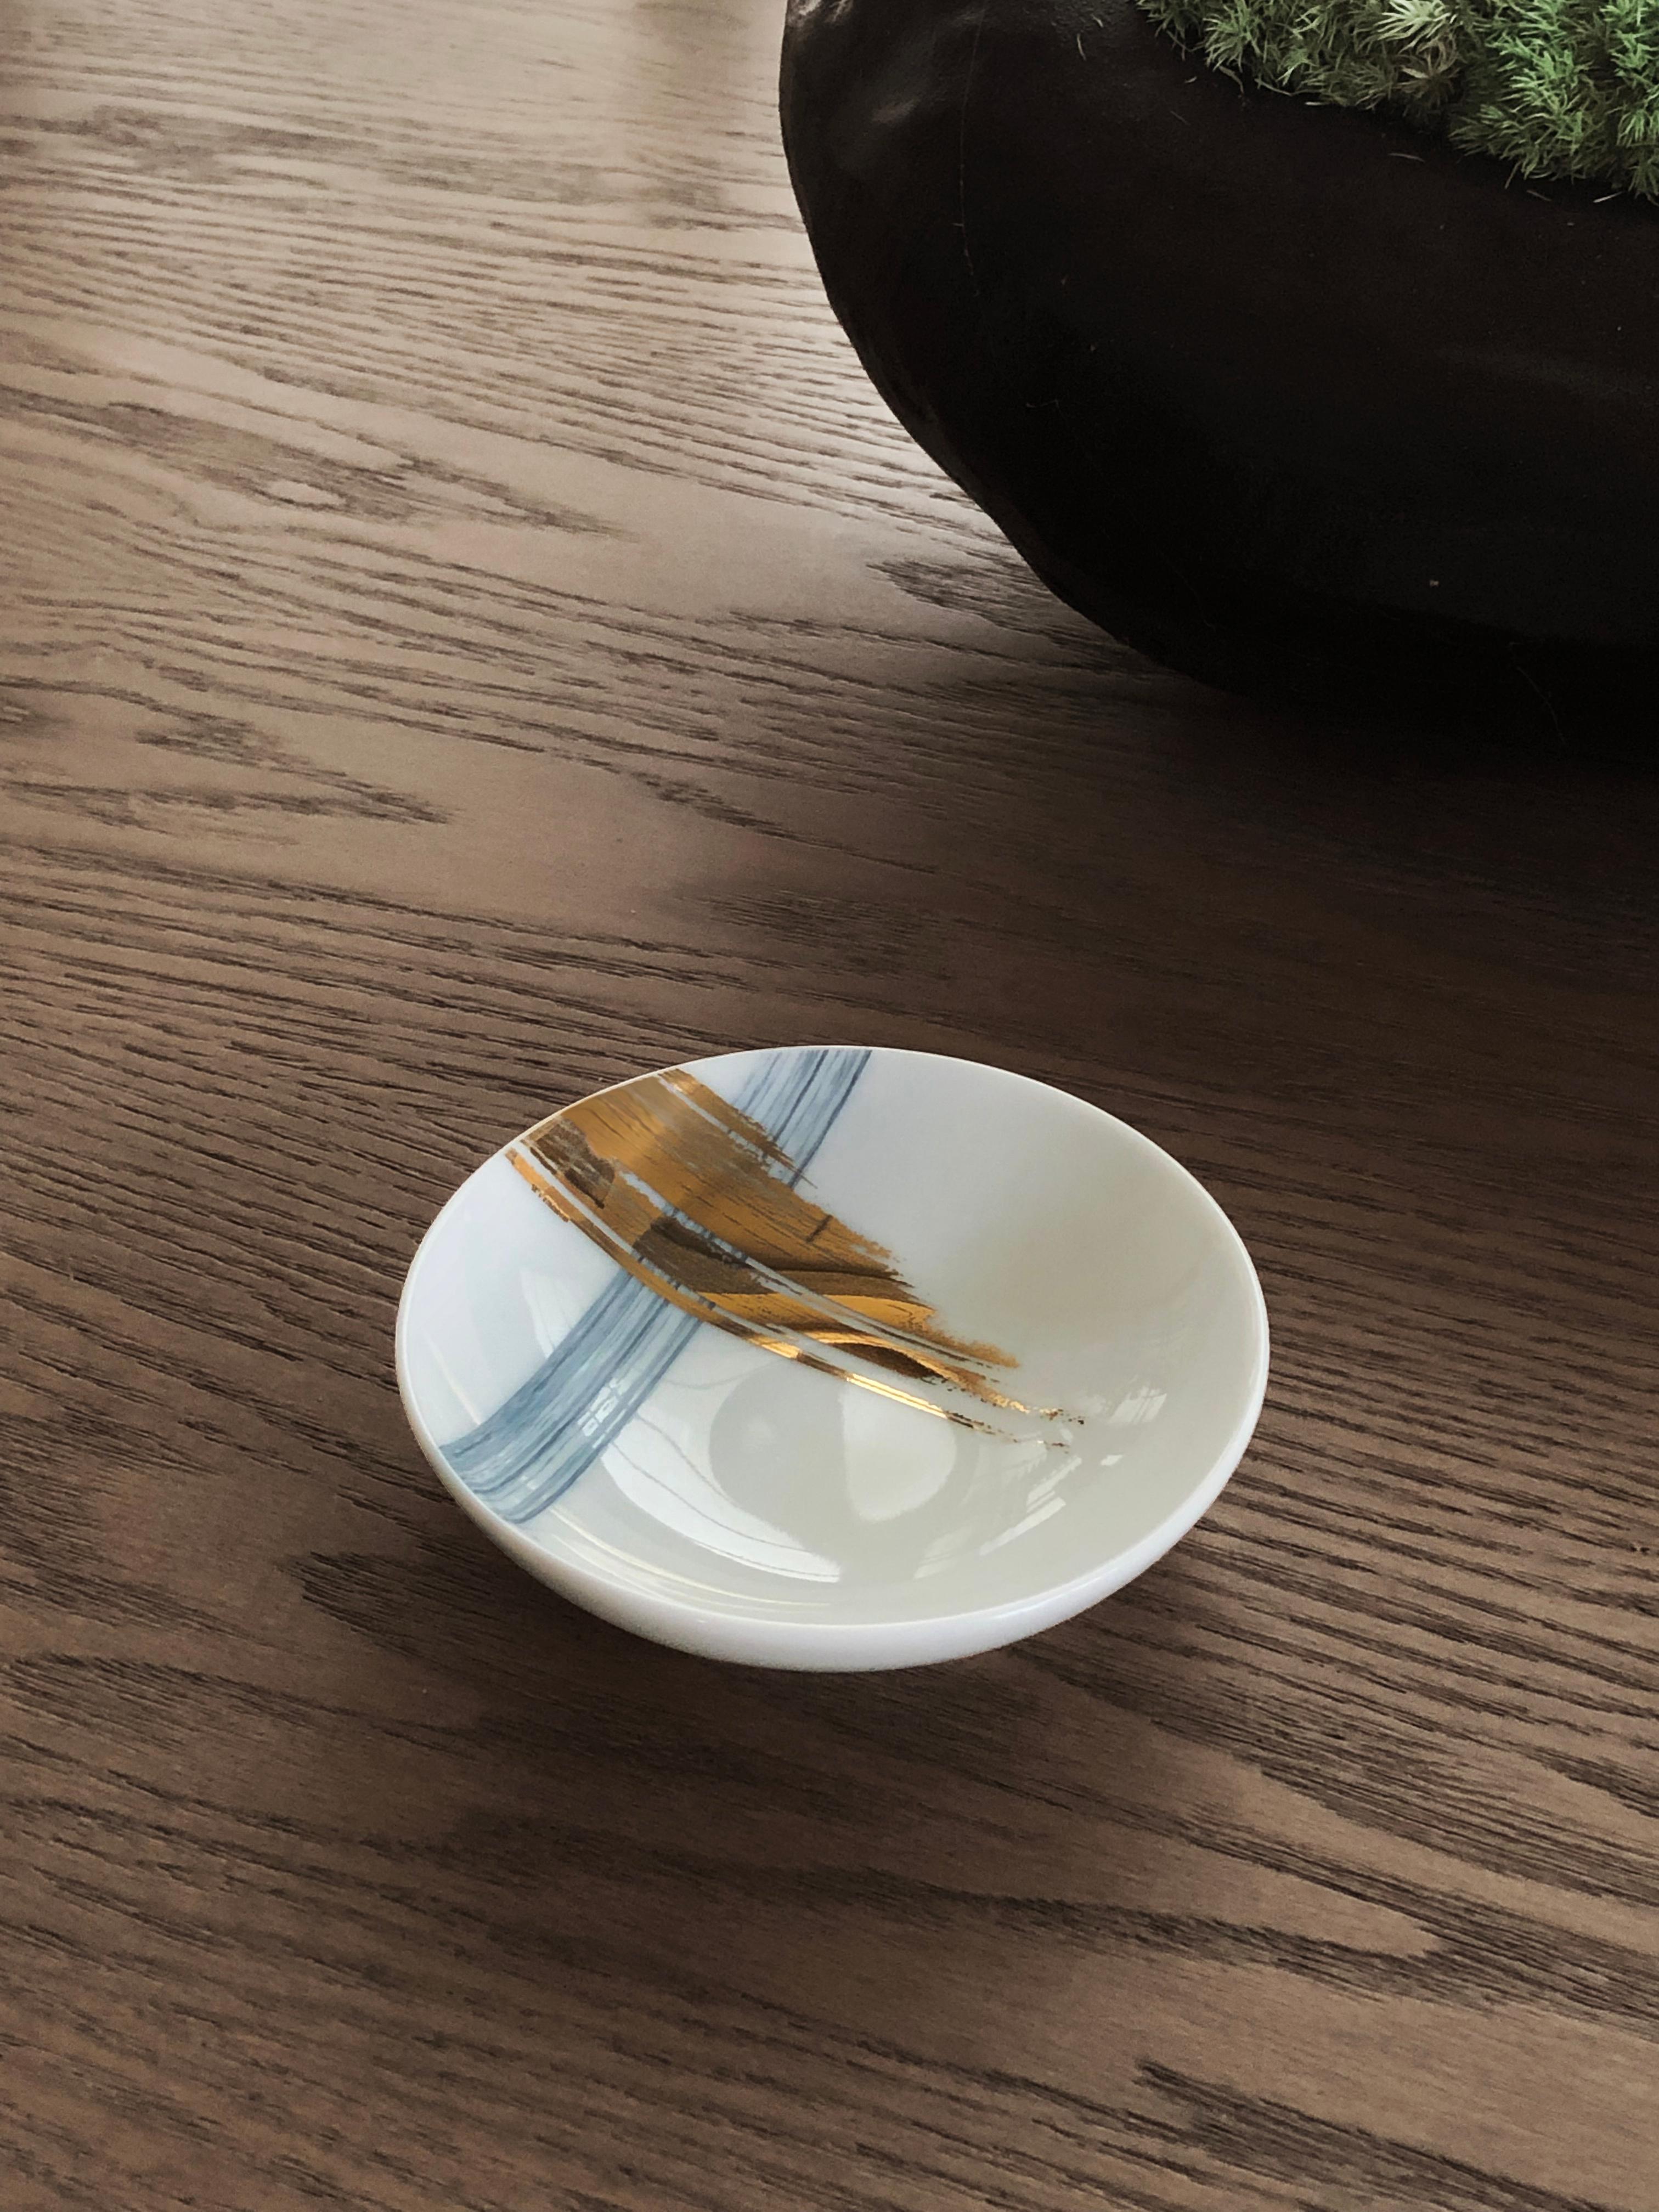 Larger quantities available upon request, with 8 weeks production time.

Description: Set of 2 medium sauce plate (2 pieces)
Color: Blue and gold
Size: 9 Ø x 2.5 H cm, 60 ml
Material: Porcelain and gold
Collection: Artisan Brush.